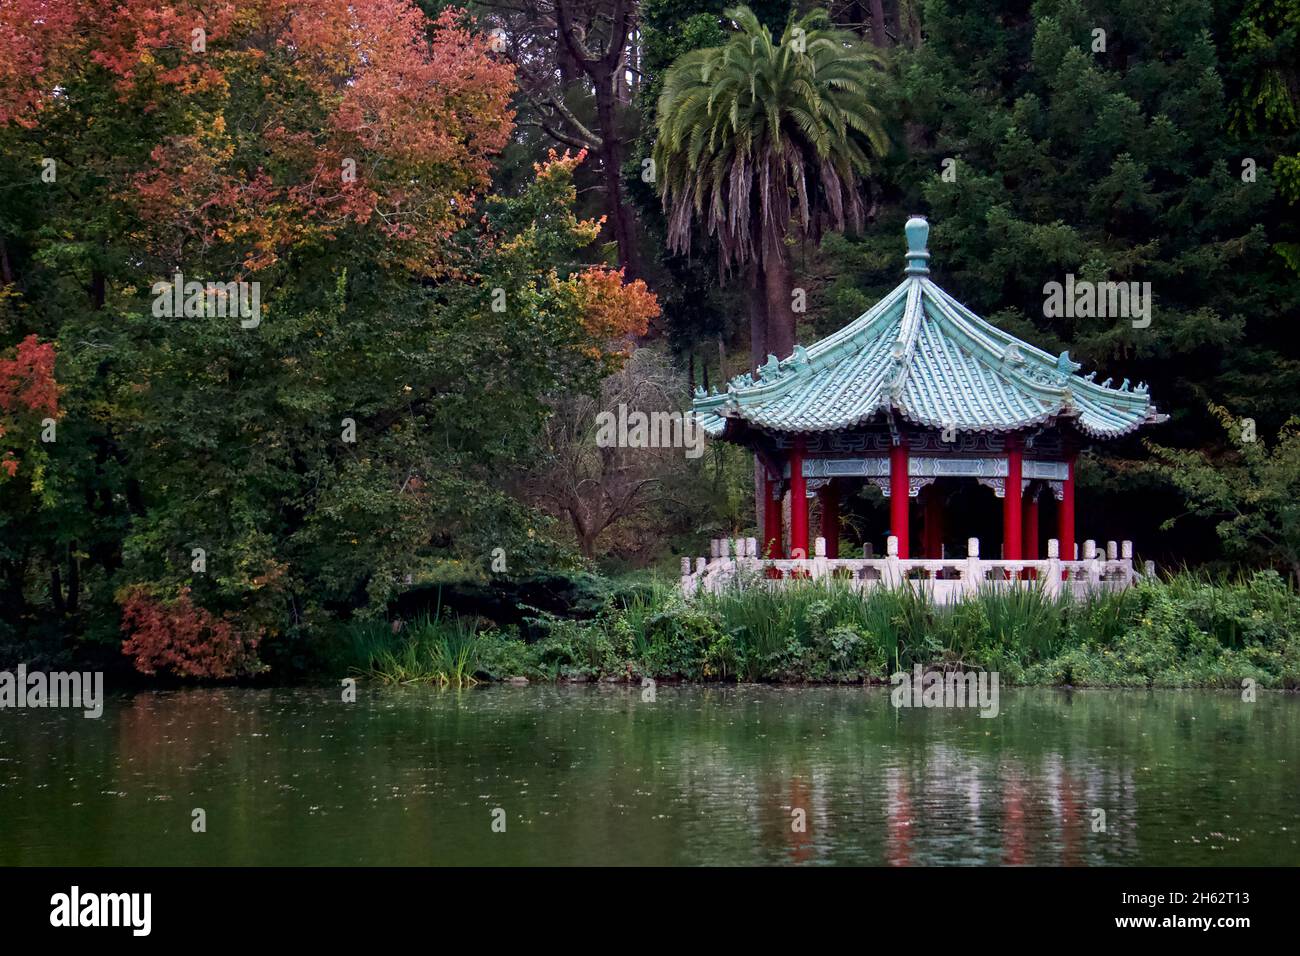 The Golden Gate Pavilion, a Chinese pagoda that was a sister city gift from Taipei, Taiwan in 1976, at Stow Lake in Golden Gate Park, San Francisco. Stock Photo